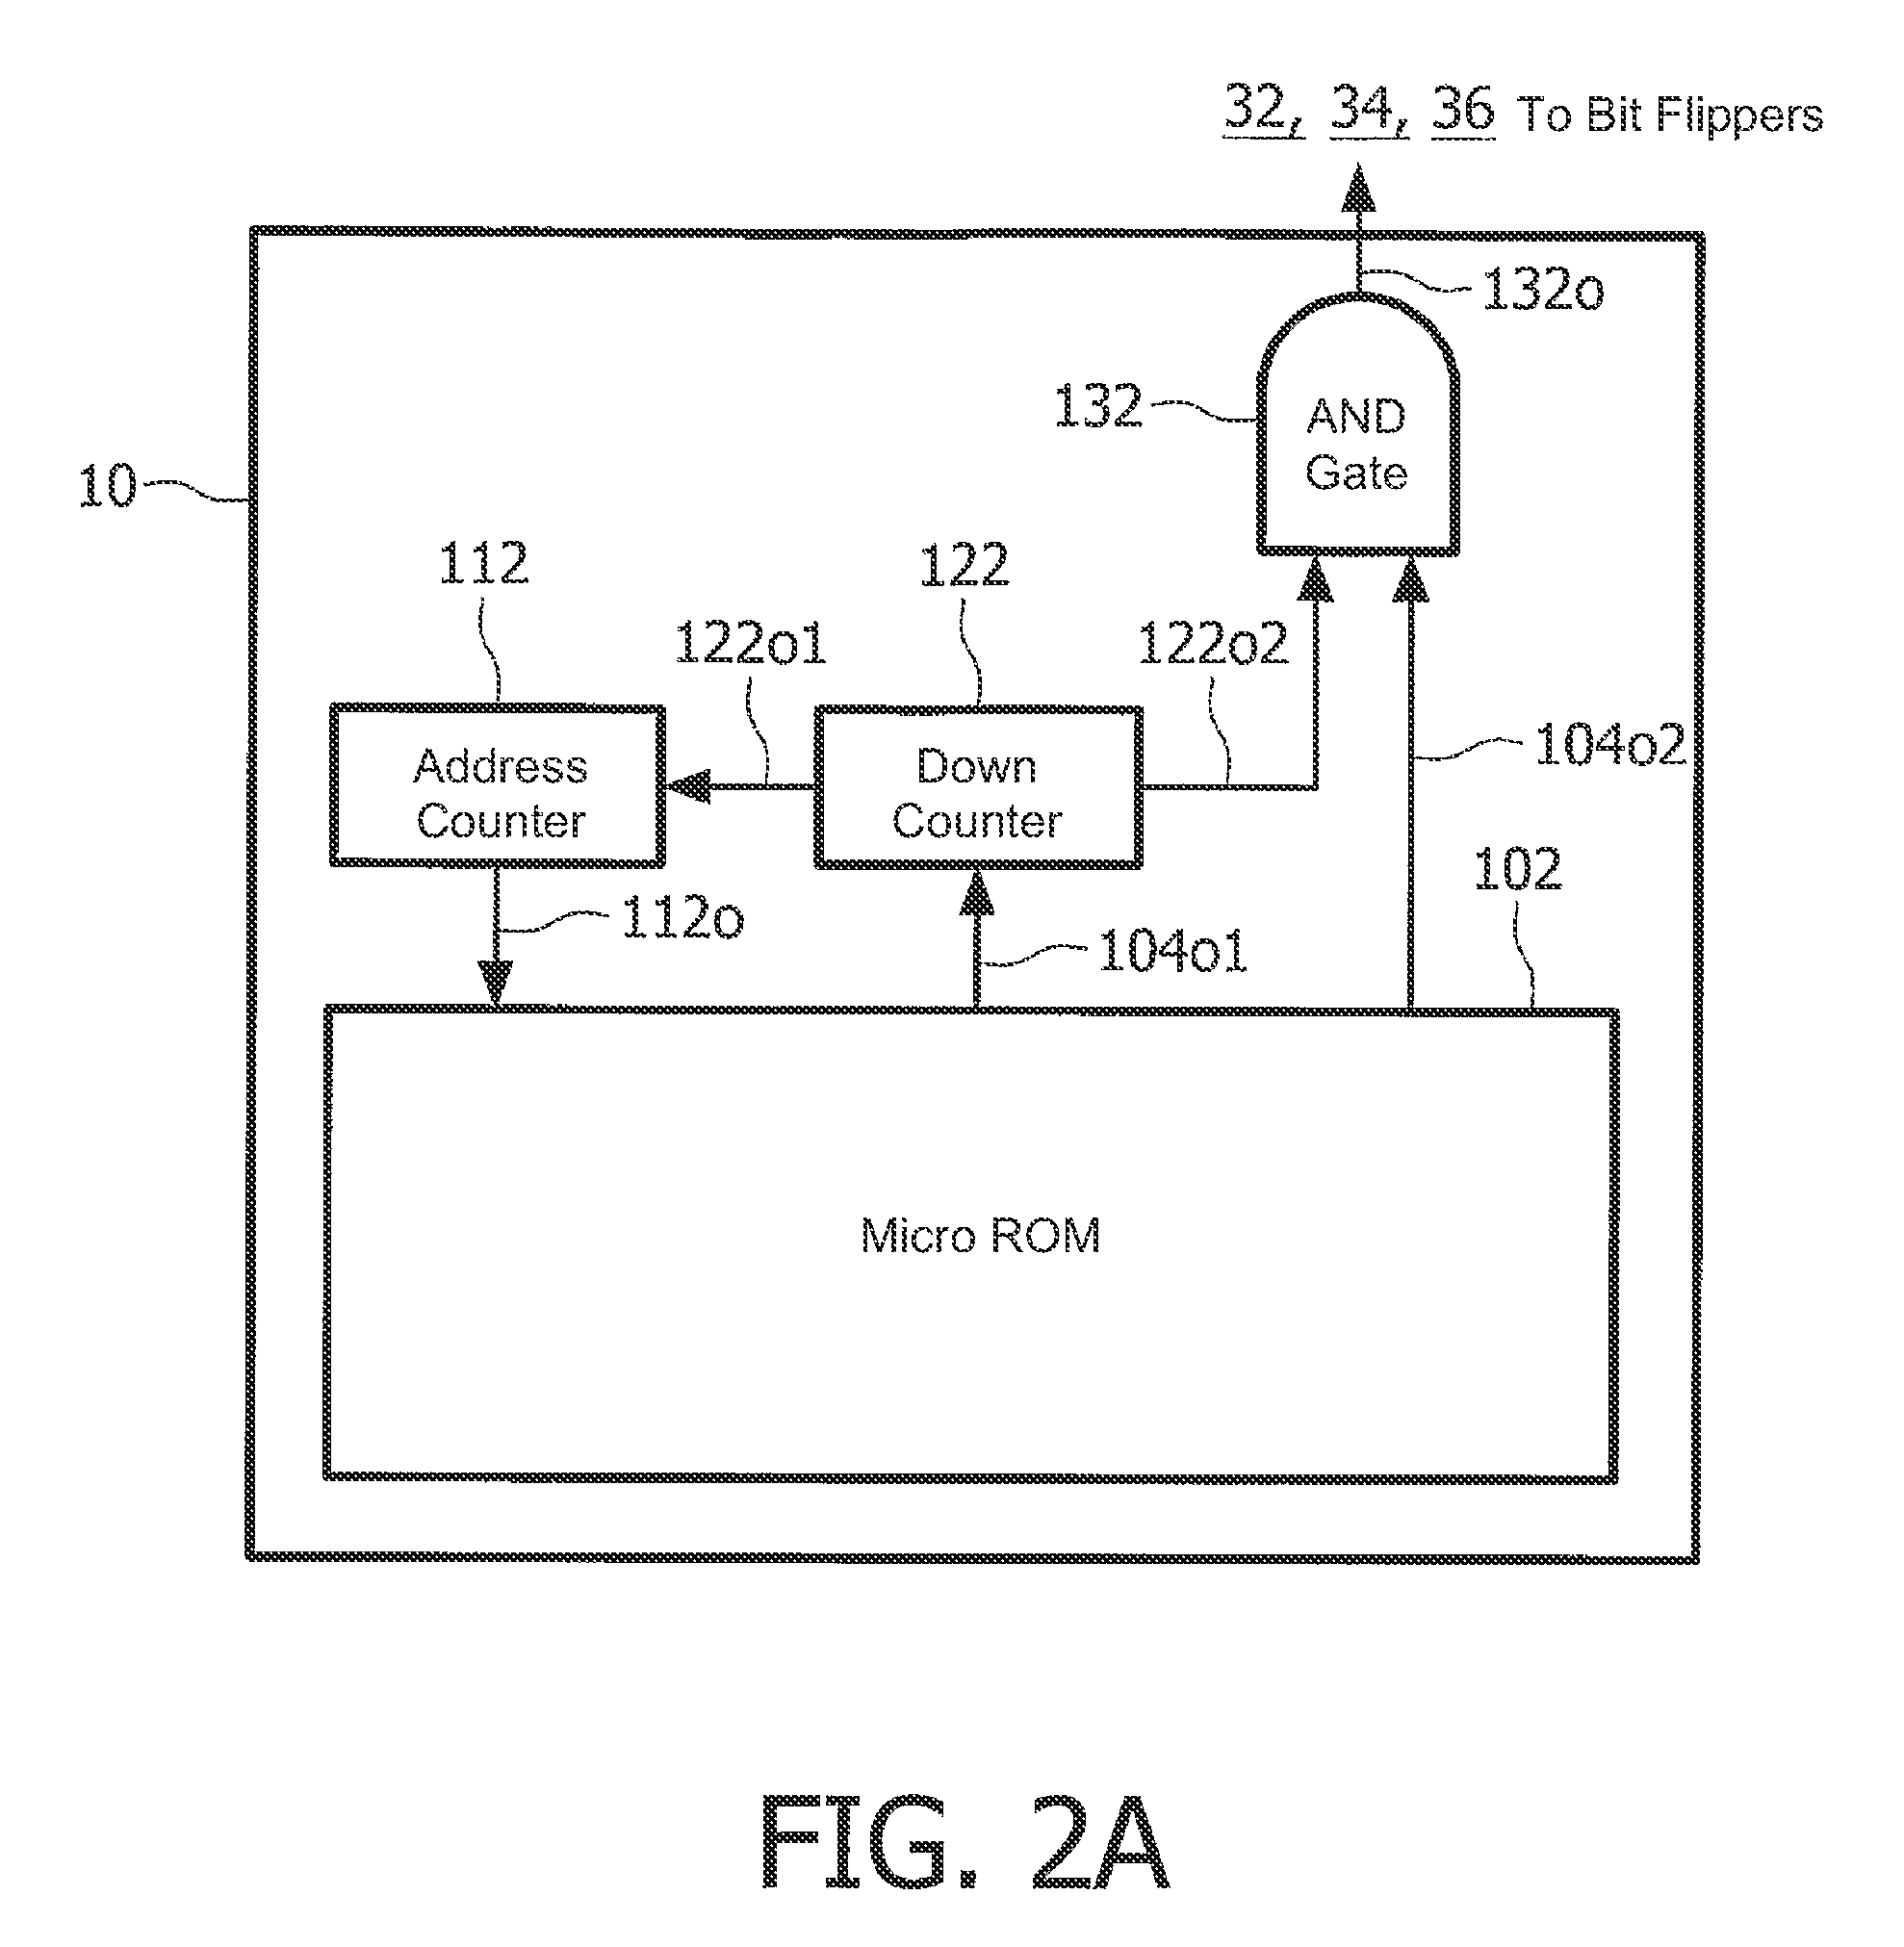 Circuit arrangement and method of testing an application circuit provided in said circuit arrangement